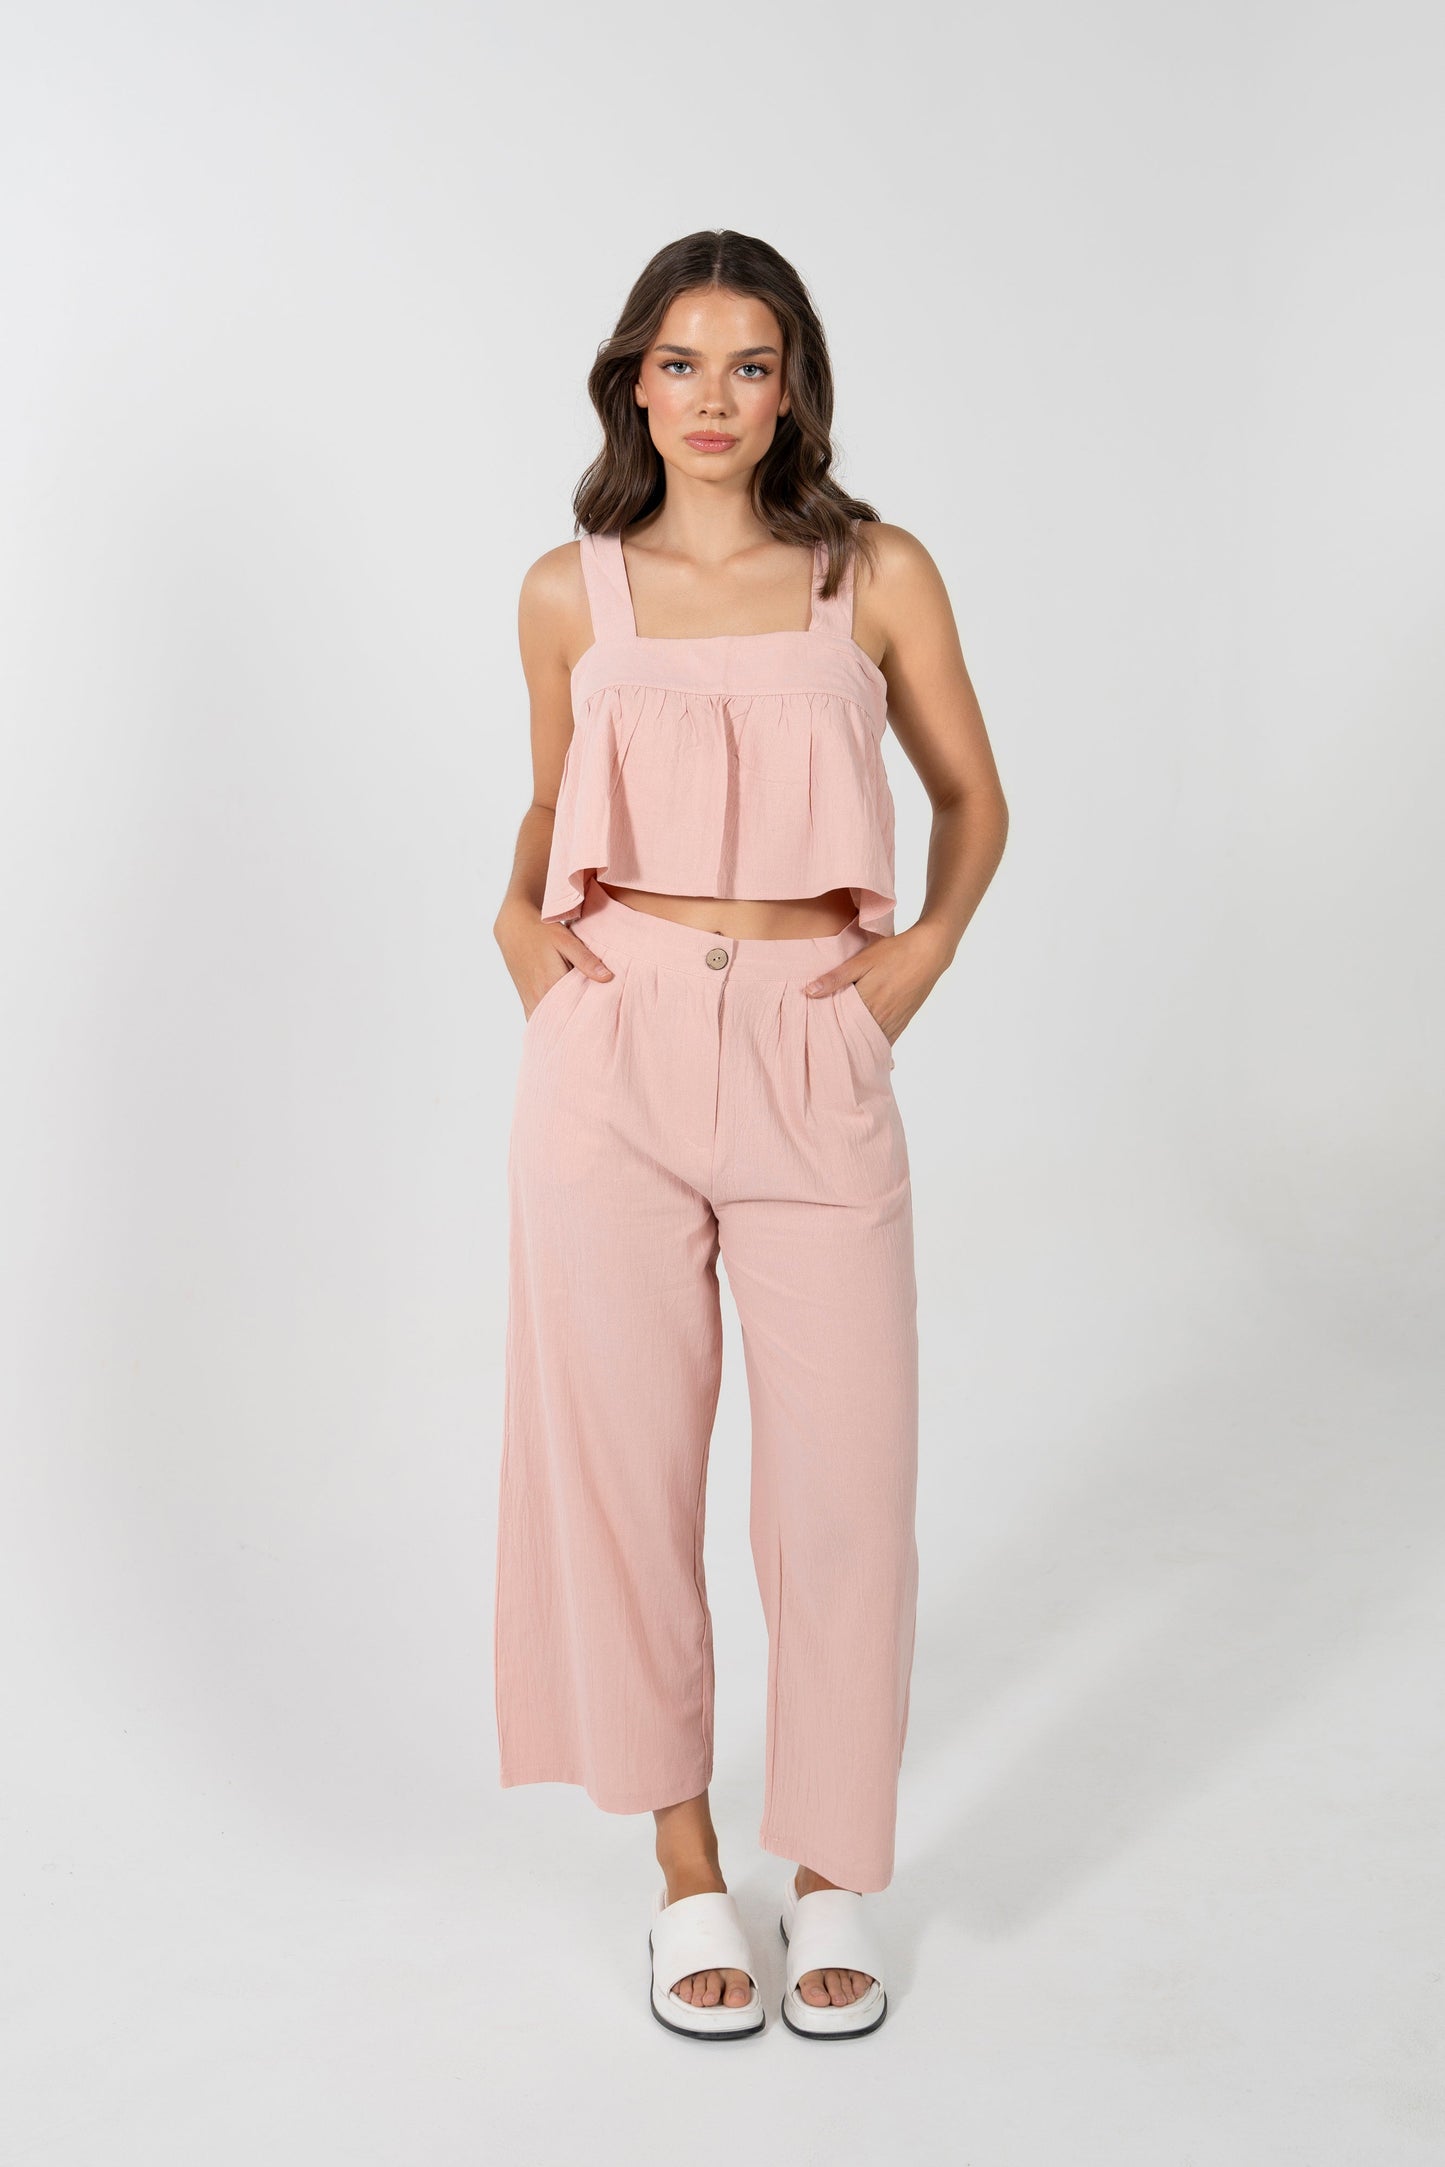 ALORA 7/8 HIGH WAISTED PANT IN DUSTY ROSE